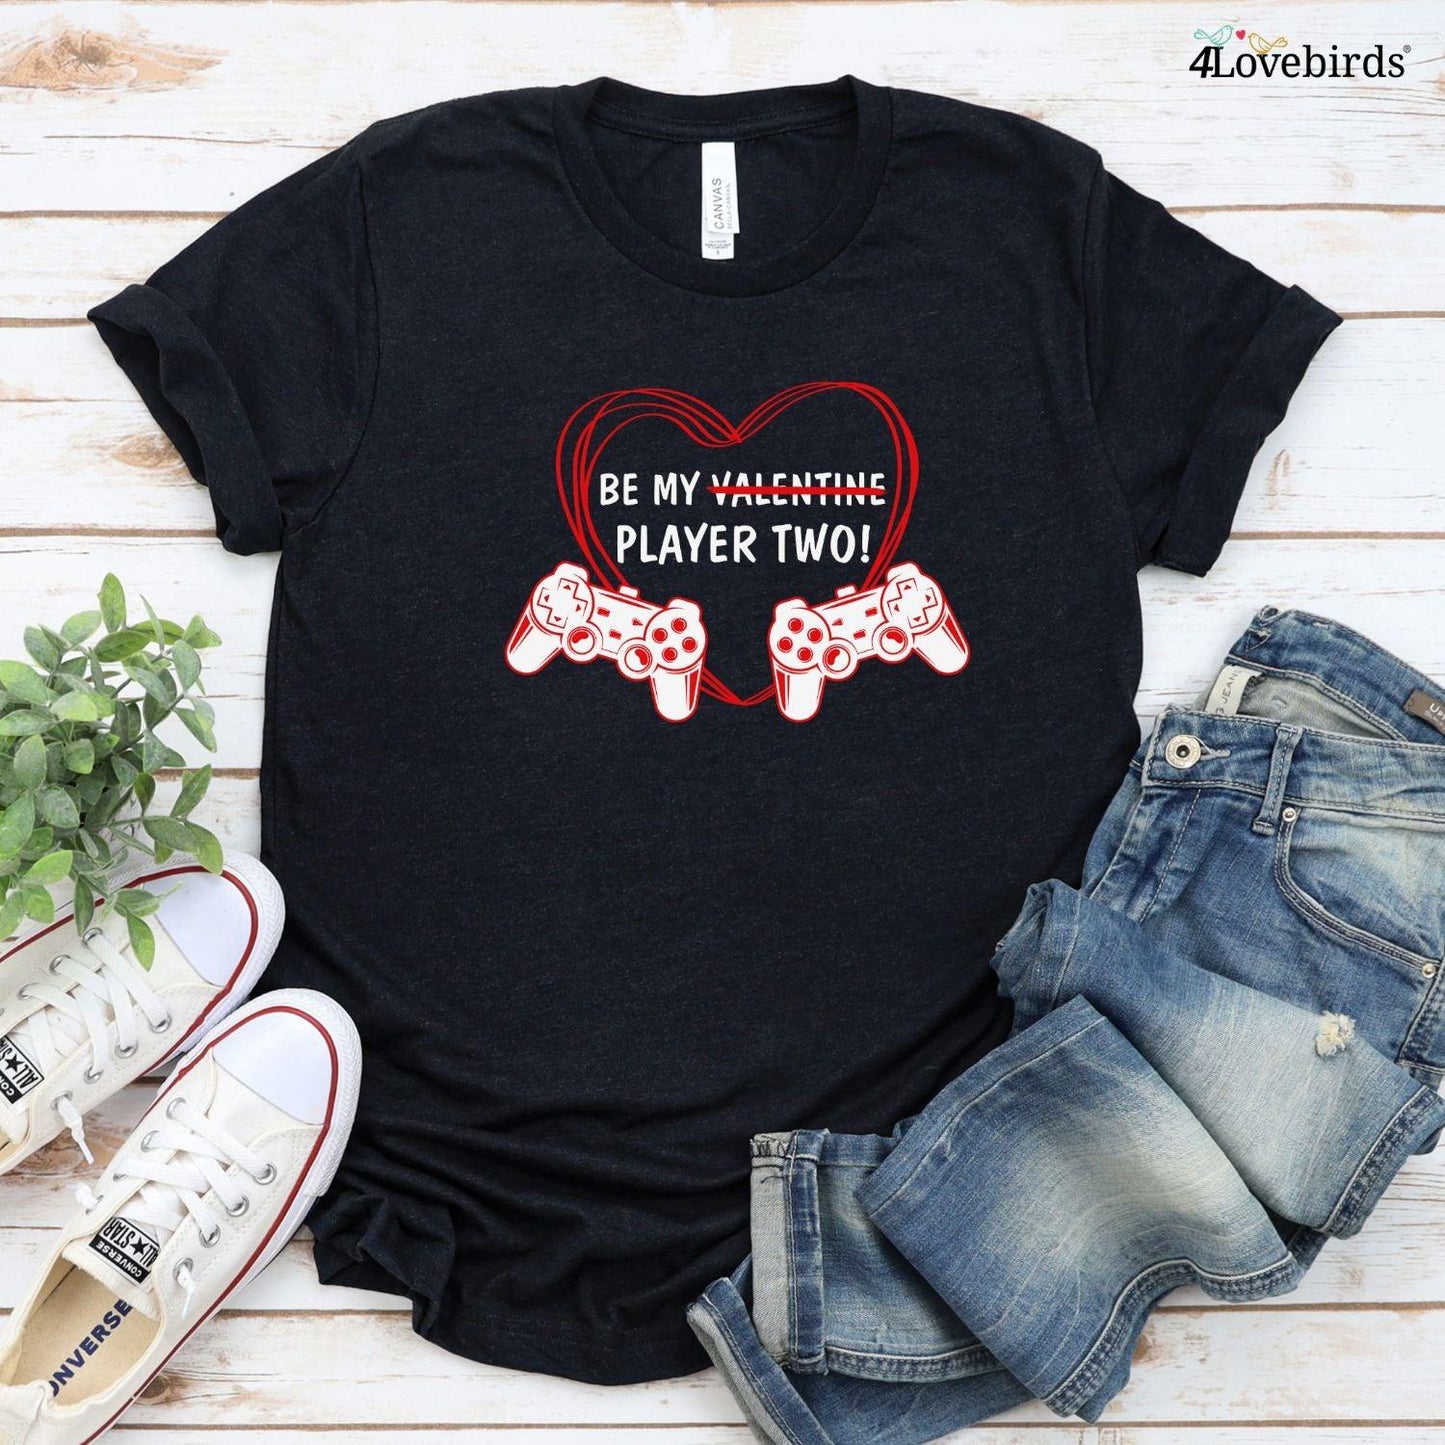 Matching Set for Couples: Be My Player One & Two, Lovers Outfits, Gift for Couples, Valentine's Day, Gaming Couples, Geek Couple Outfits - 4Lovebirds